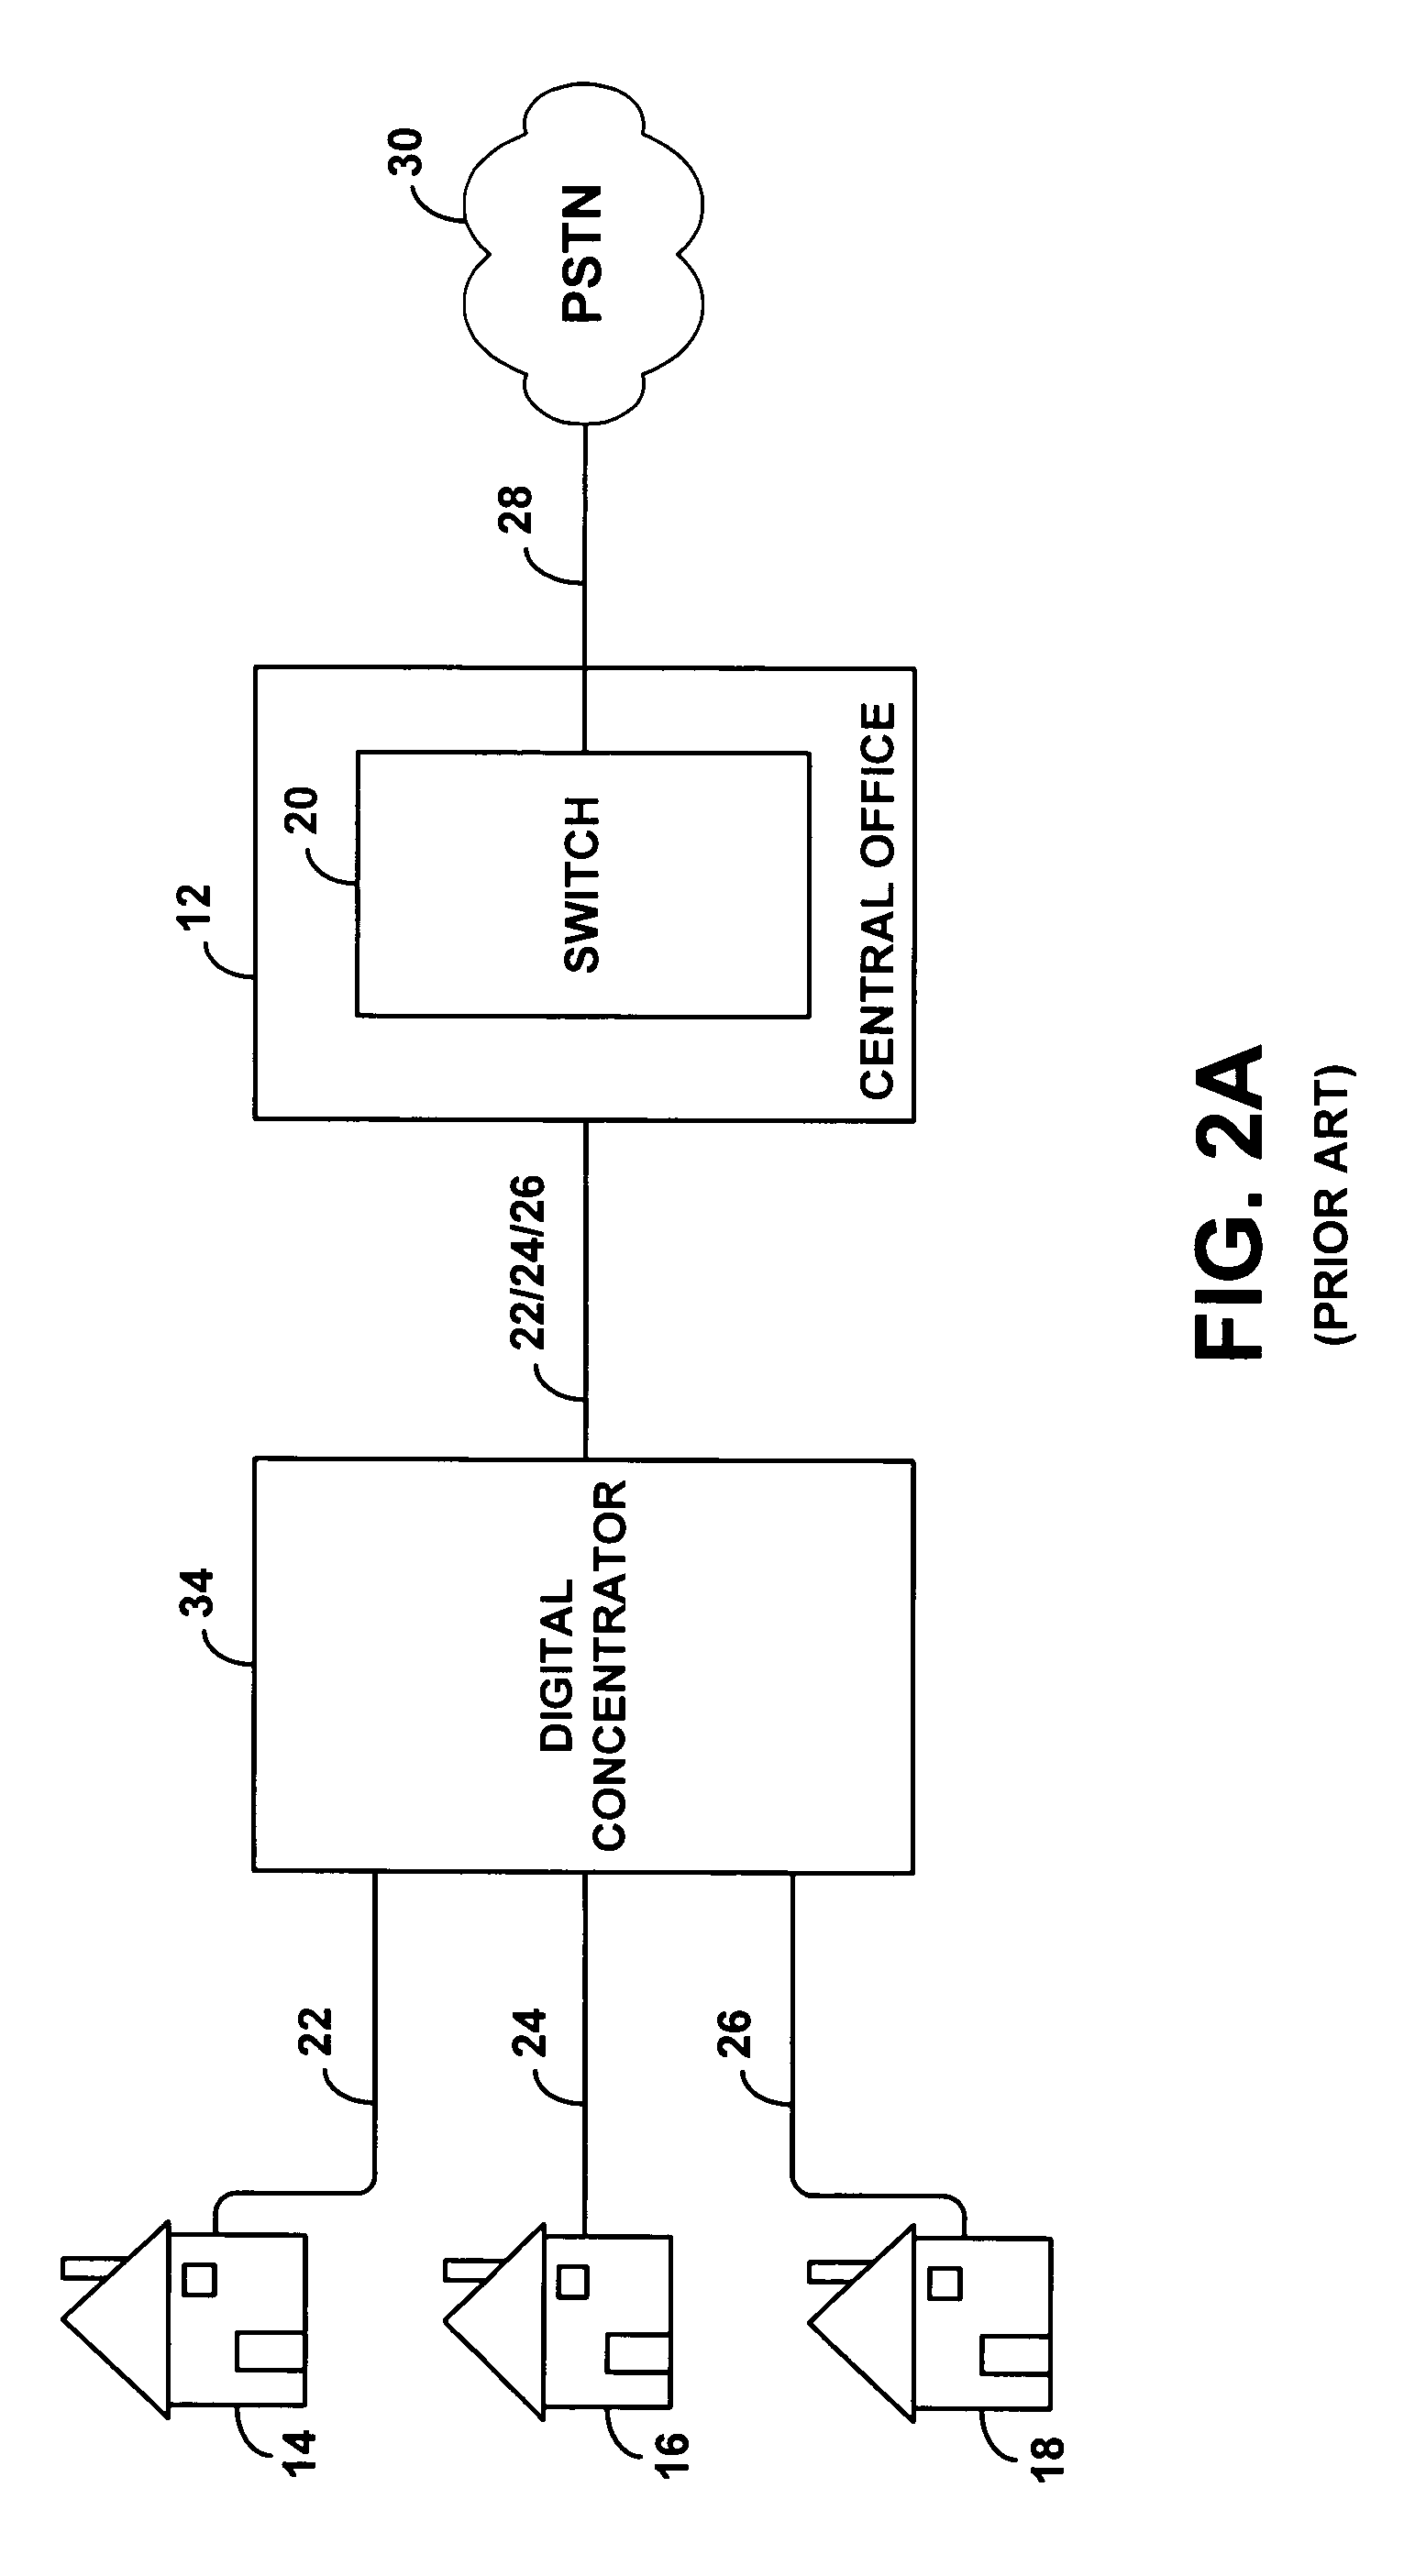 Method and system for delivering wireless telephone service to customer premises via local loop telephone lines